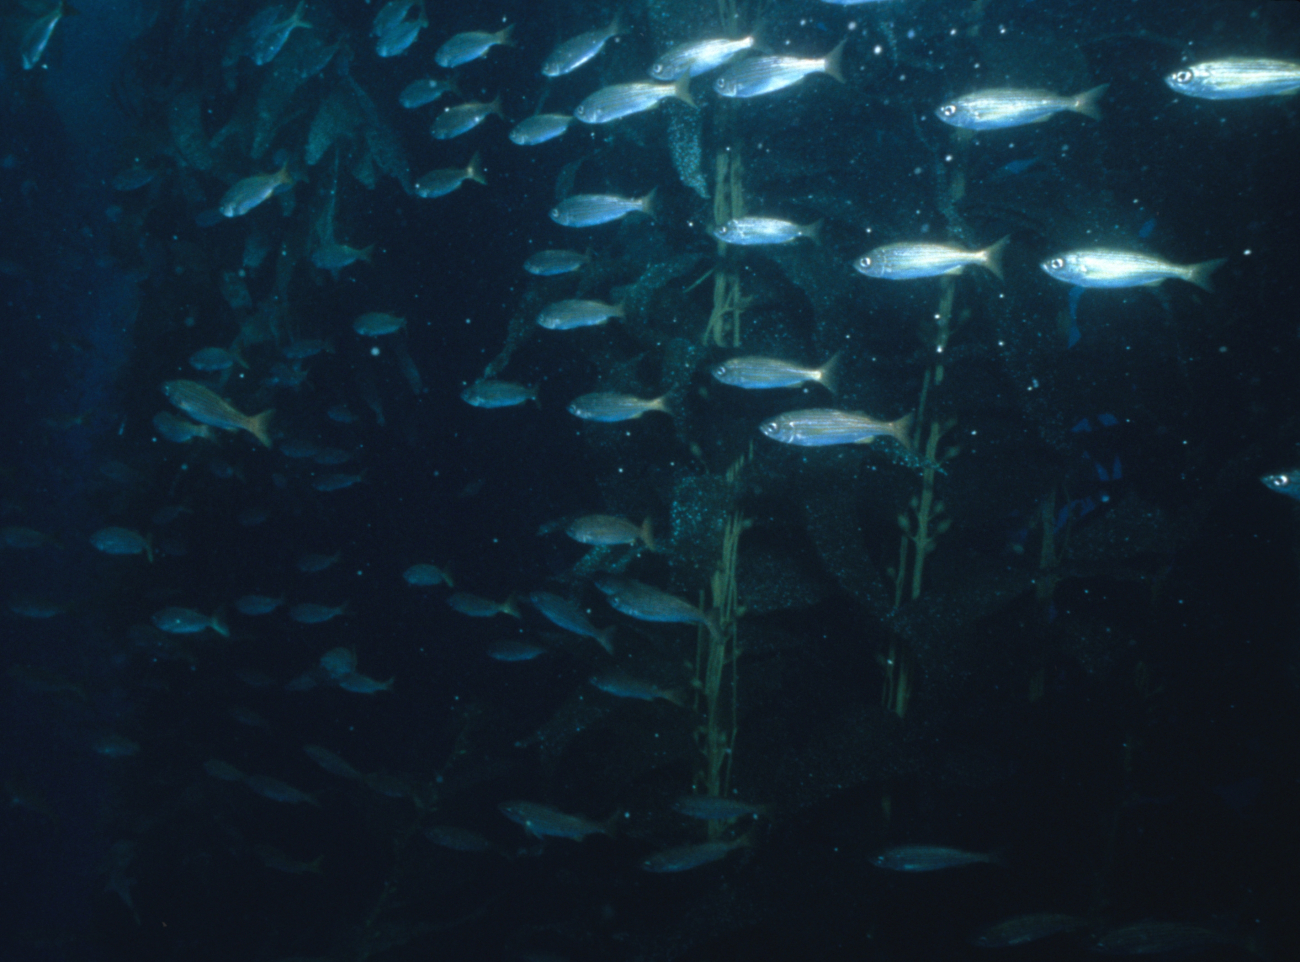 Unidentified schooling fish in kelp forest (not coral reef environment)